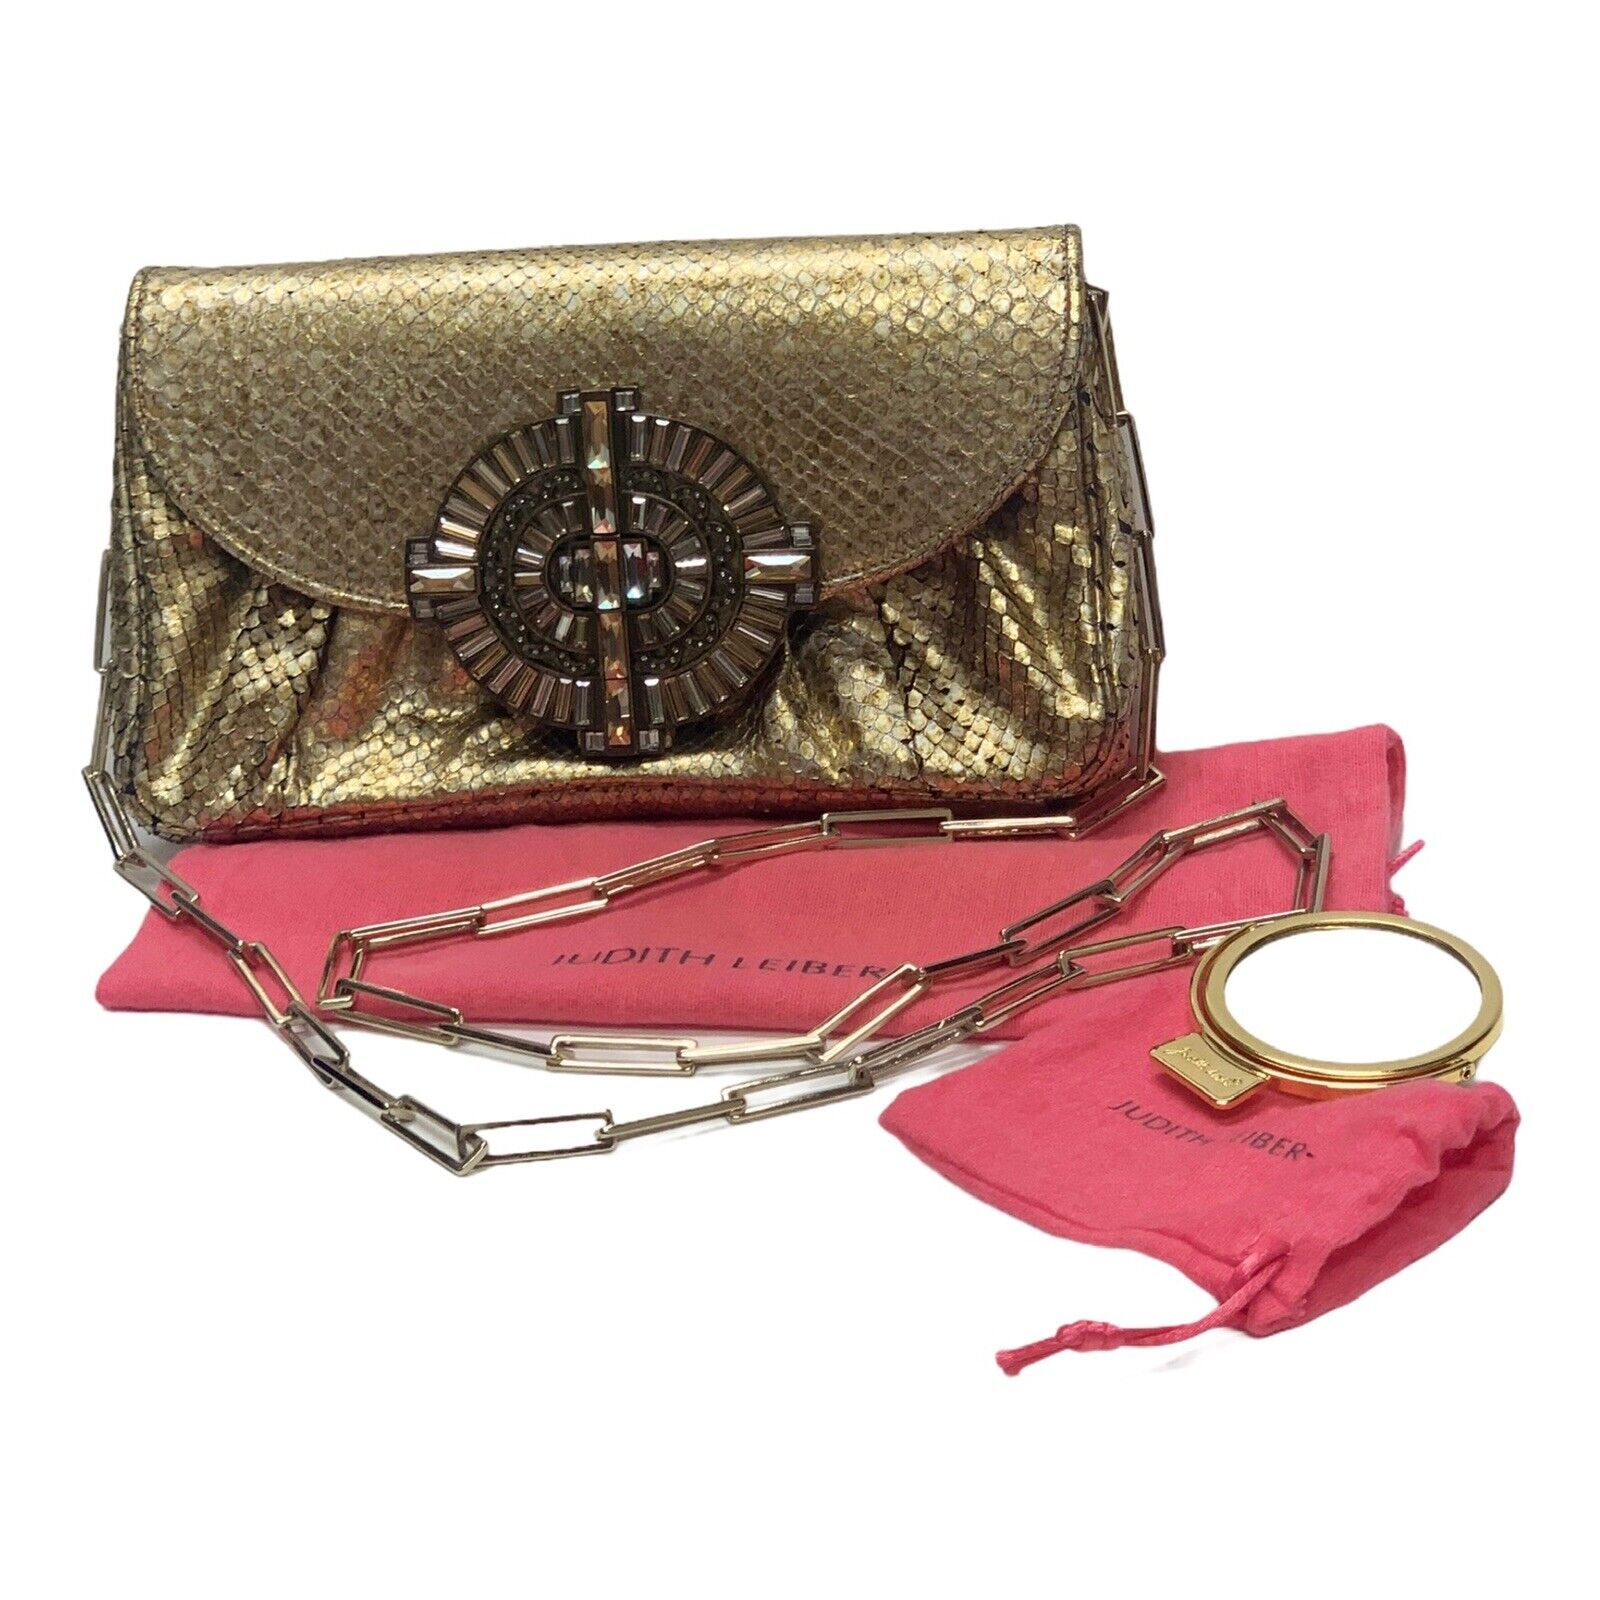 Judith Leiber Crystal Bow Clutch Bag In Schampagne